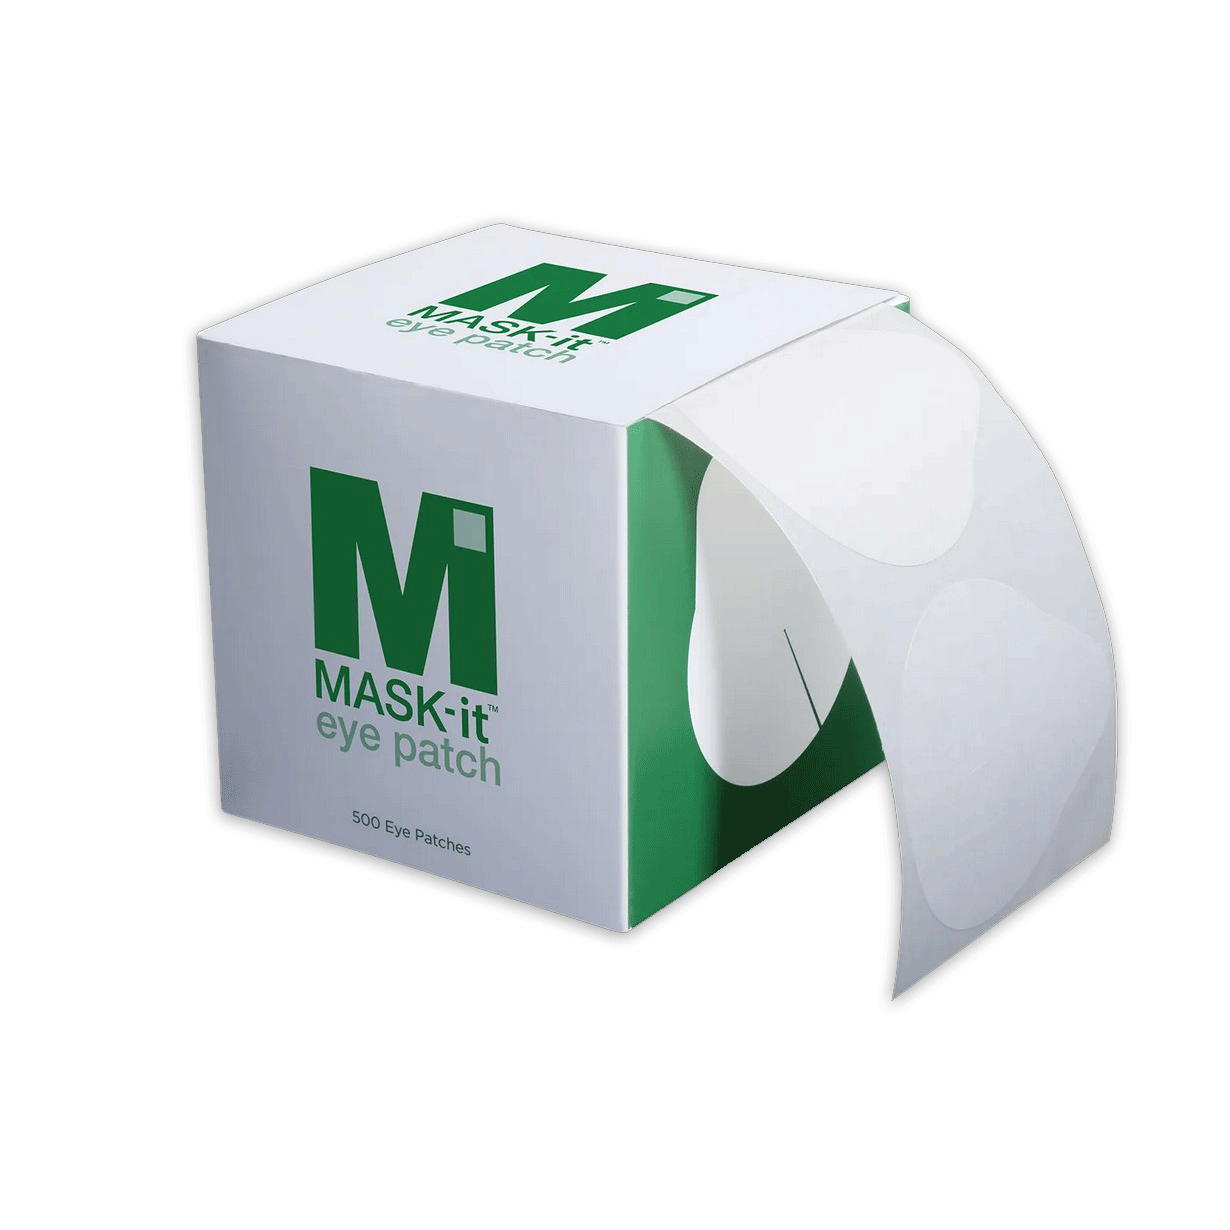 MASK-it™ Eye Patch: Disposable Eye Patches - Roll of 250 or 500